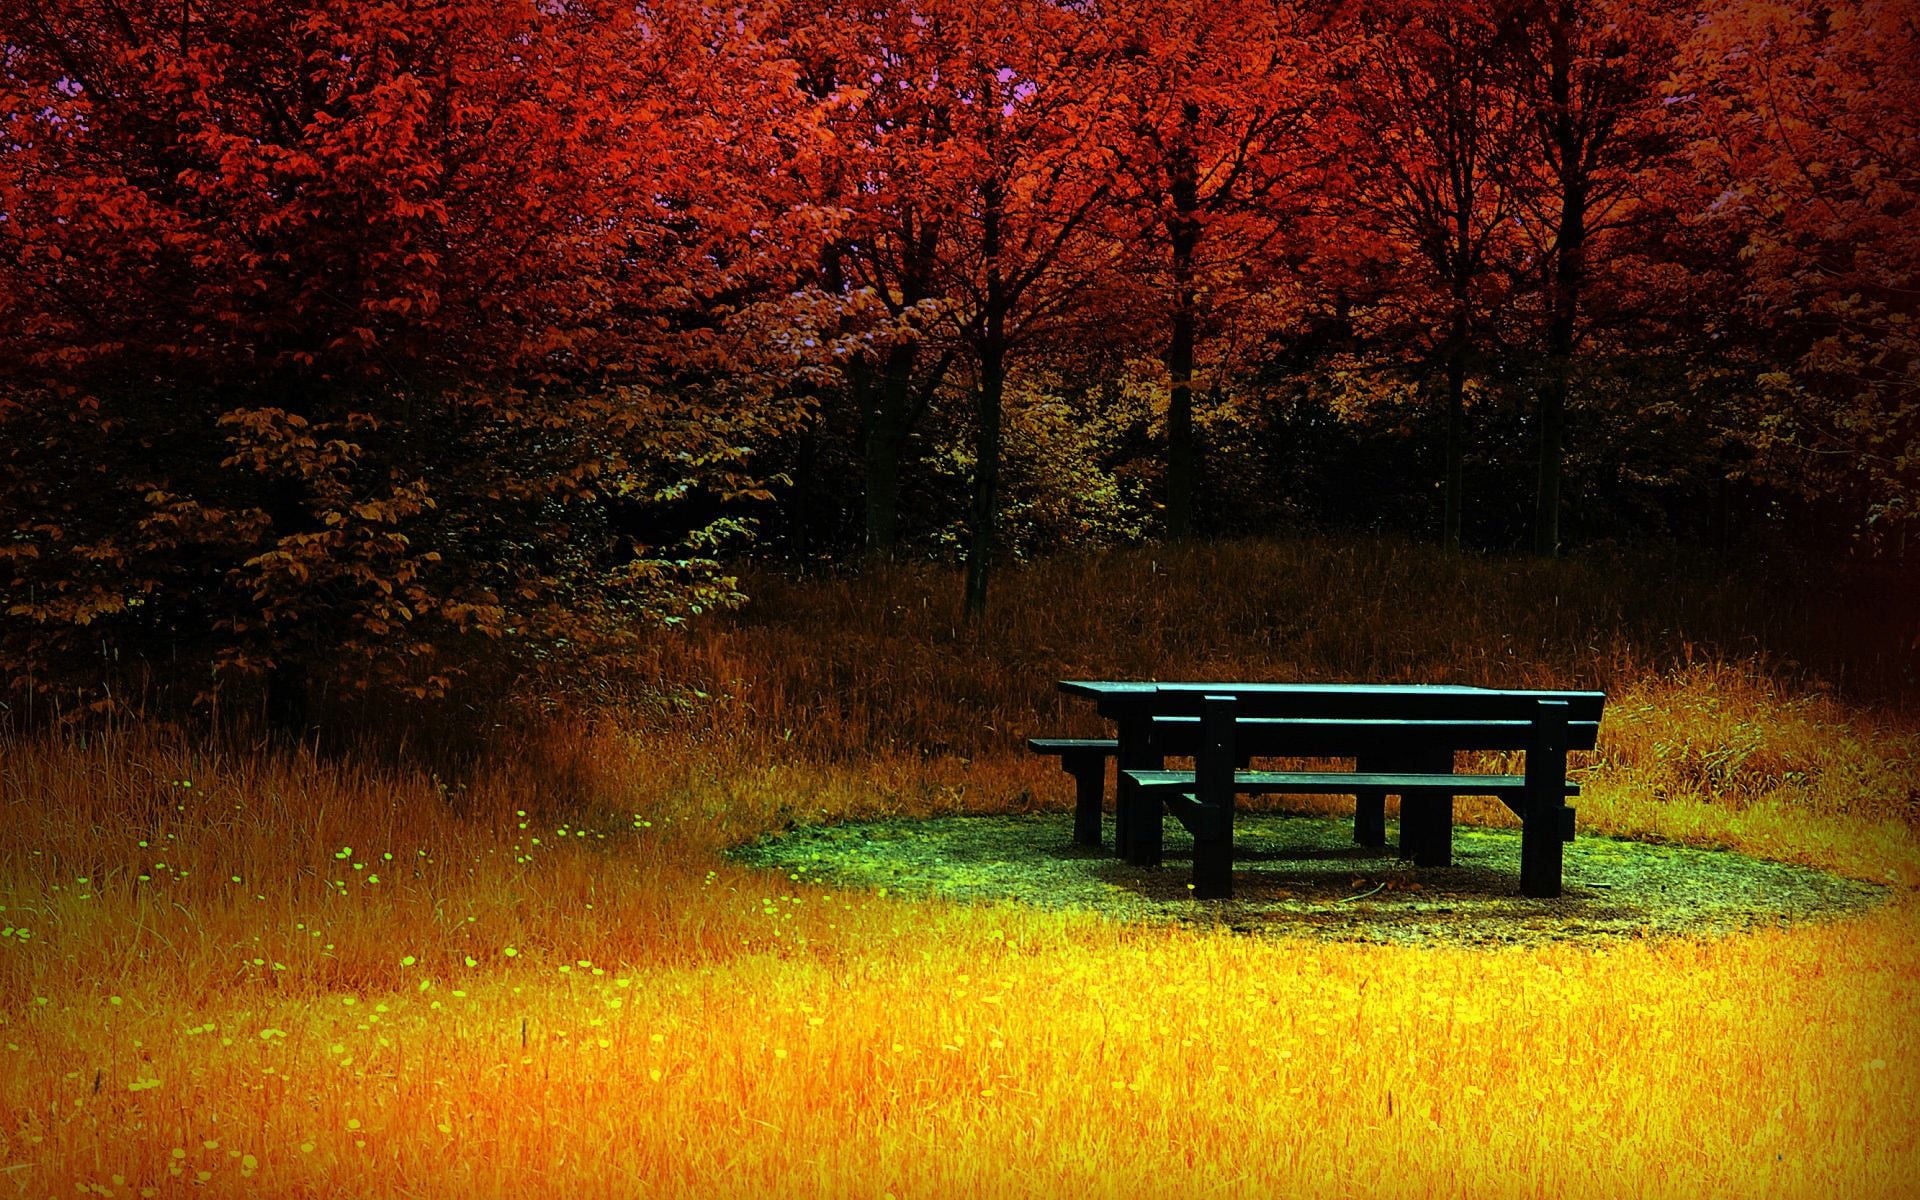 black wooden picnic table surrounded by orange grass and tall red leaf trees